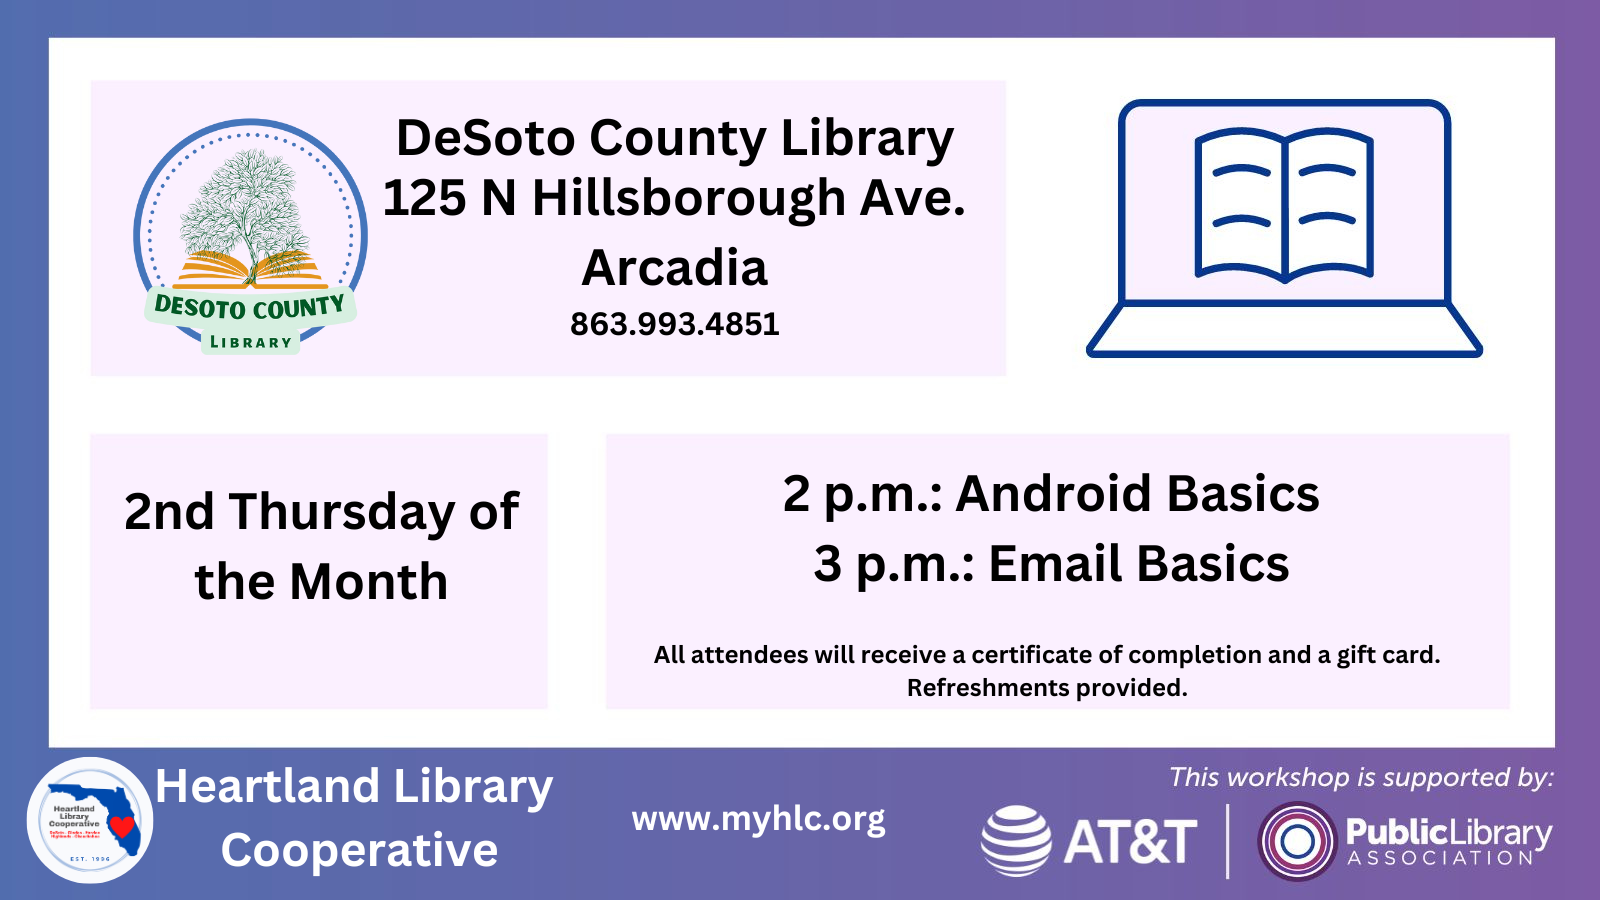 On the second Thursday of each month, DeSoto County Library will be hosting an android basics course at 2 p.m. and an email basics course at 3 p.m.